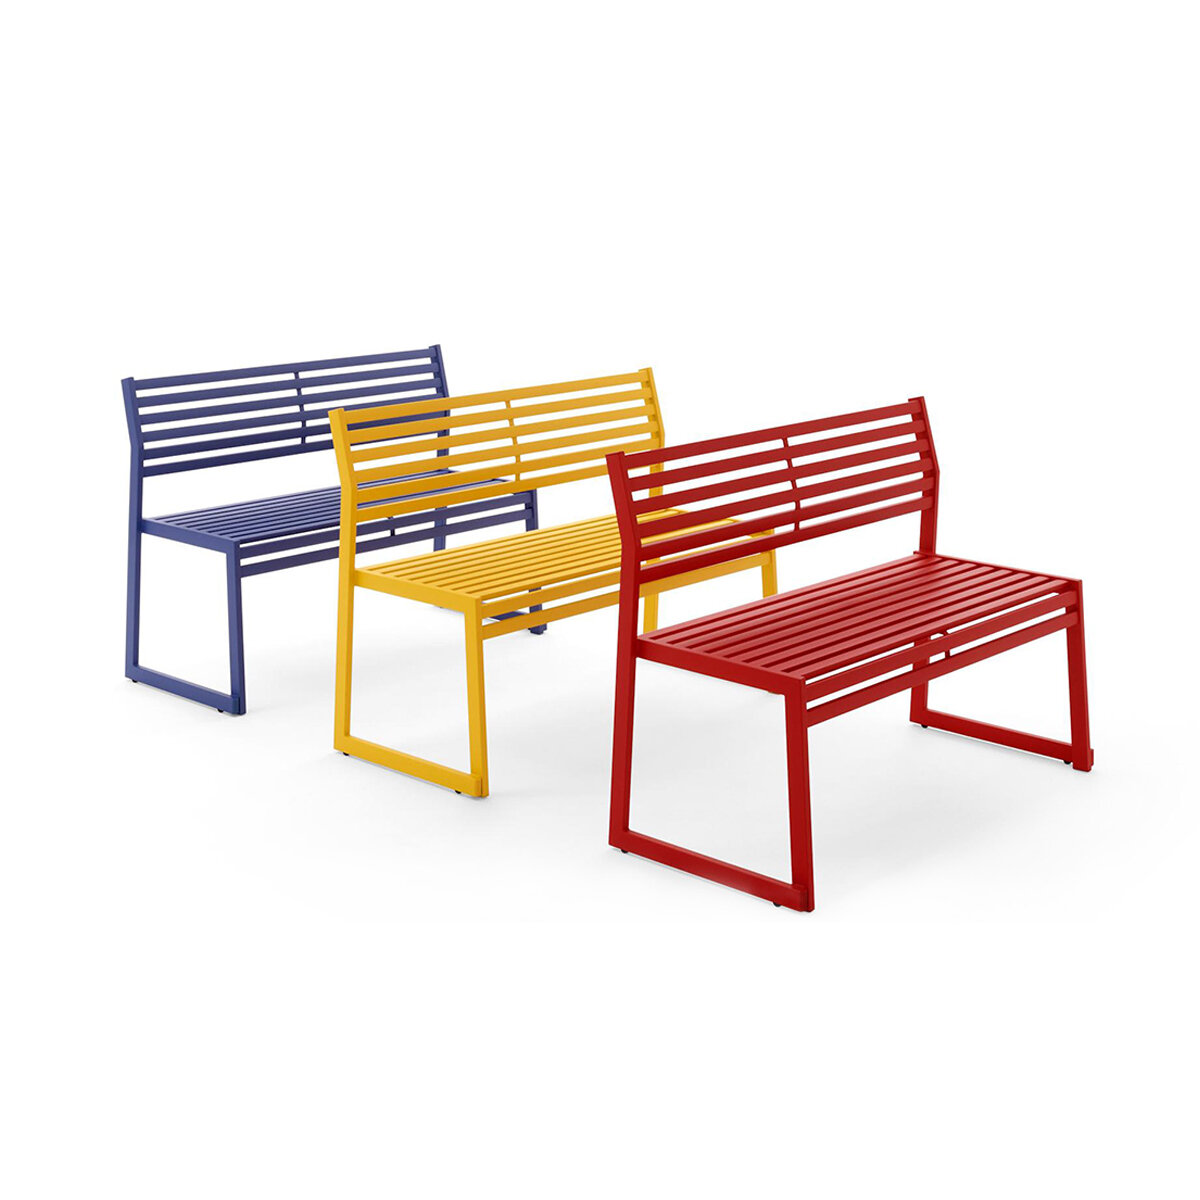 library-images-cbenchbackrest-9d2-double-bench-various-colors.jpeg